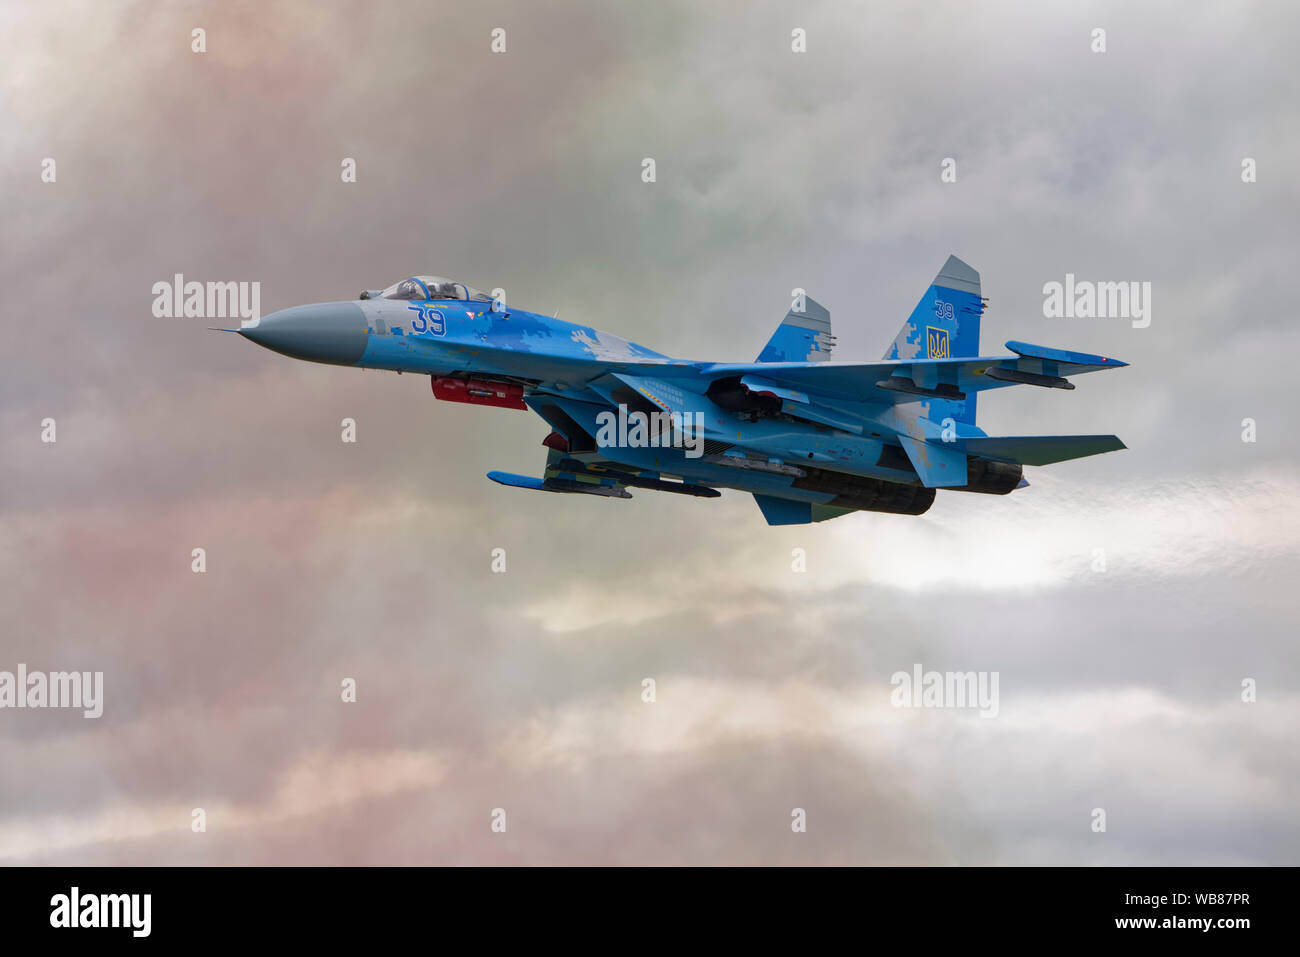 Sukhoi SU-27 air-superiority  fighter aircraft of the Ukranian 831st Tactical Aviation Brigade puts on an impressive flying display at the RIAT Stock Photo